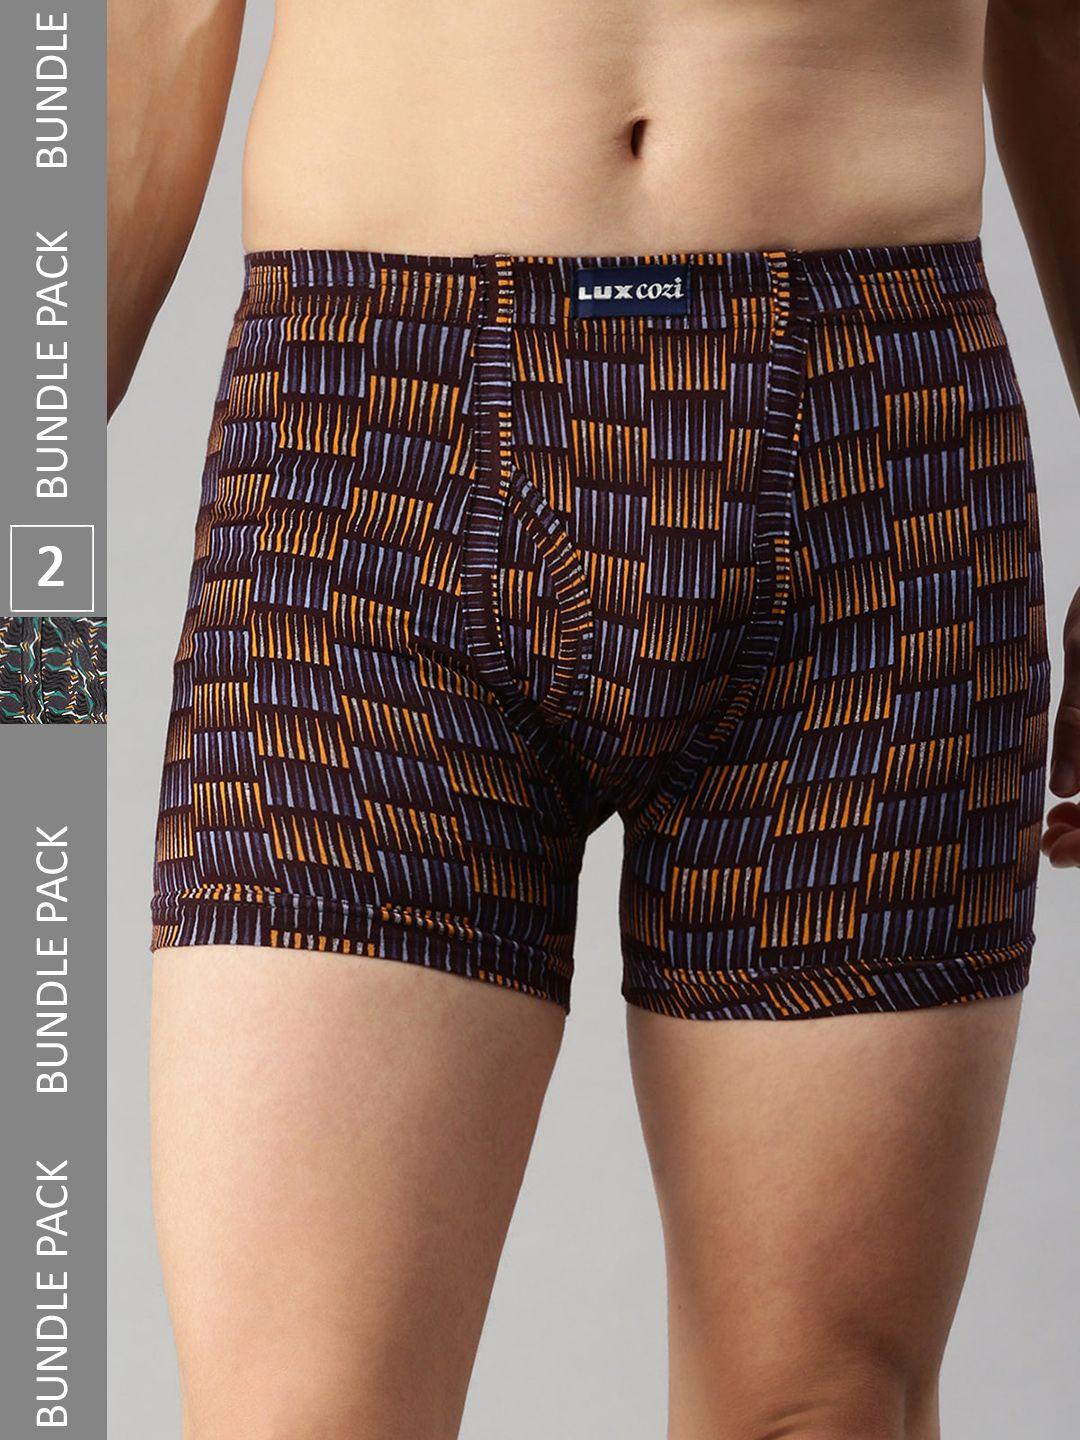 lux cozi men pack of 2 assorted printed cotton trunks cozi_bigshot_longs_print_ast4_2pc